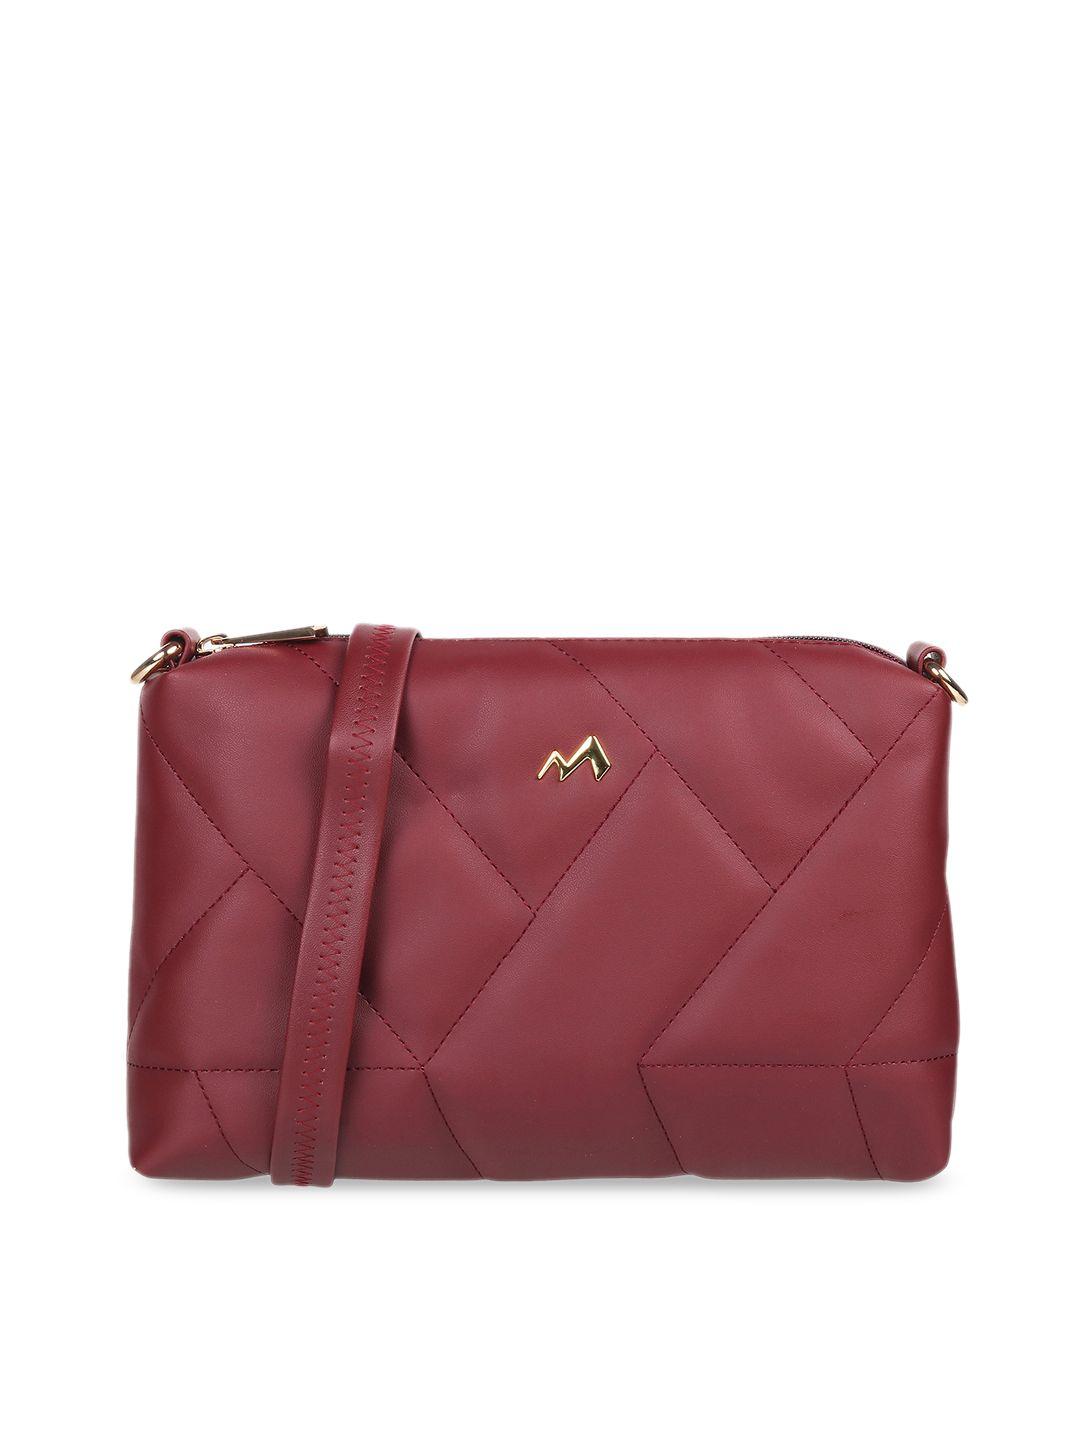 metro maroon structured sling bag with quilted